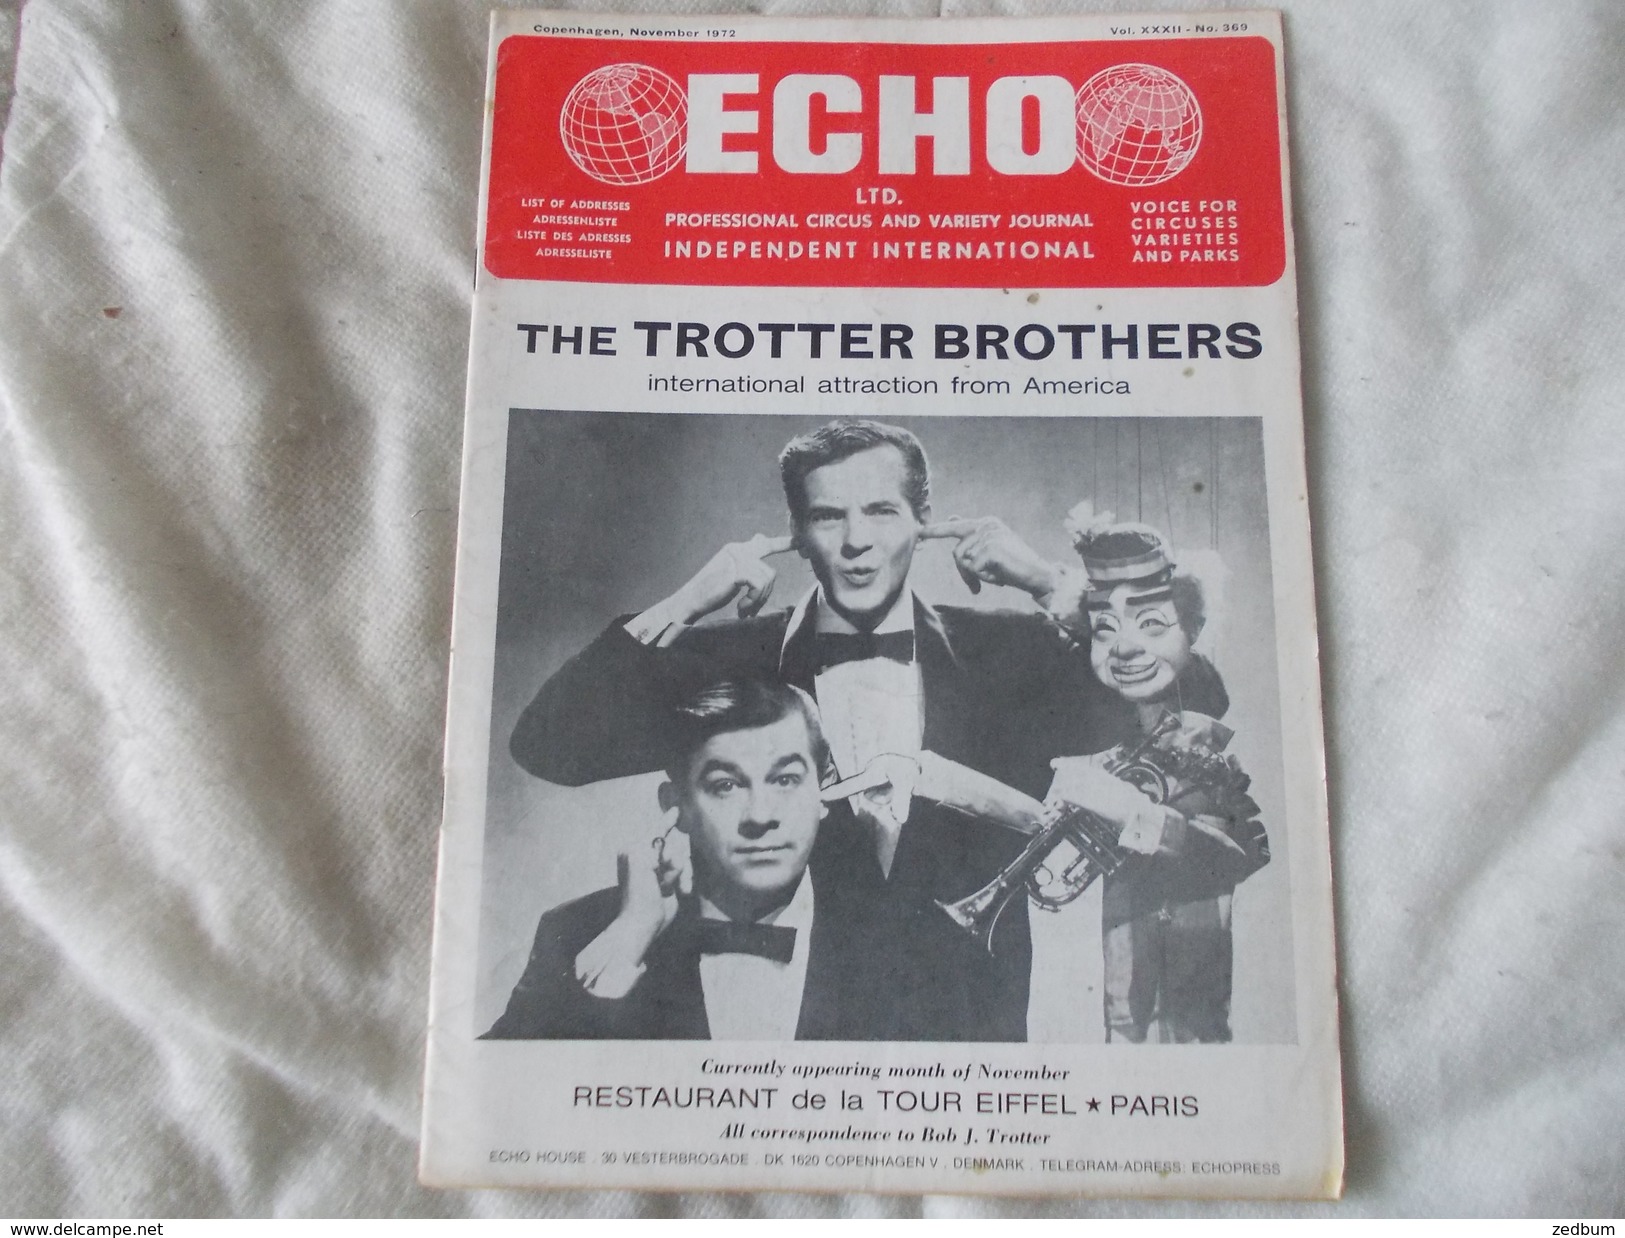 ECHO LTD Professional Circus And Variety Journal Independent International N° 369 November 1972 - Divertimento